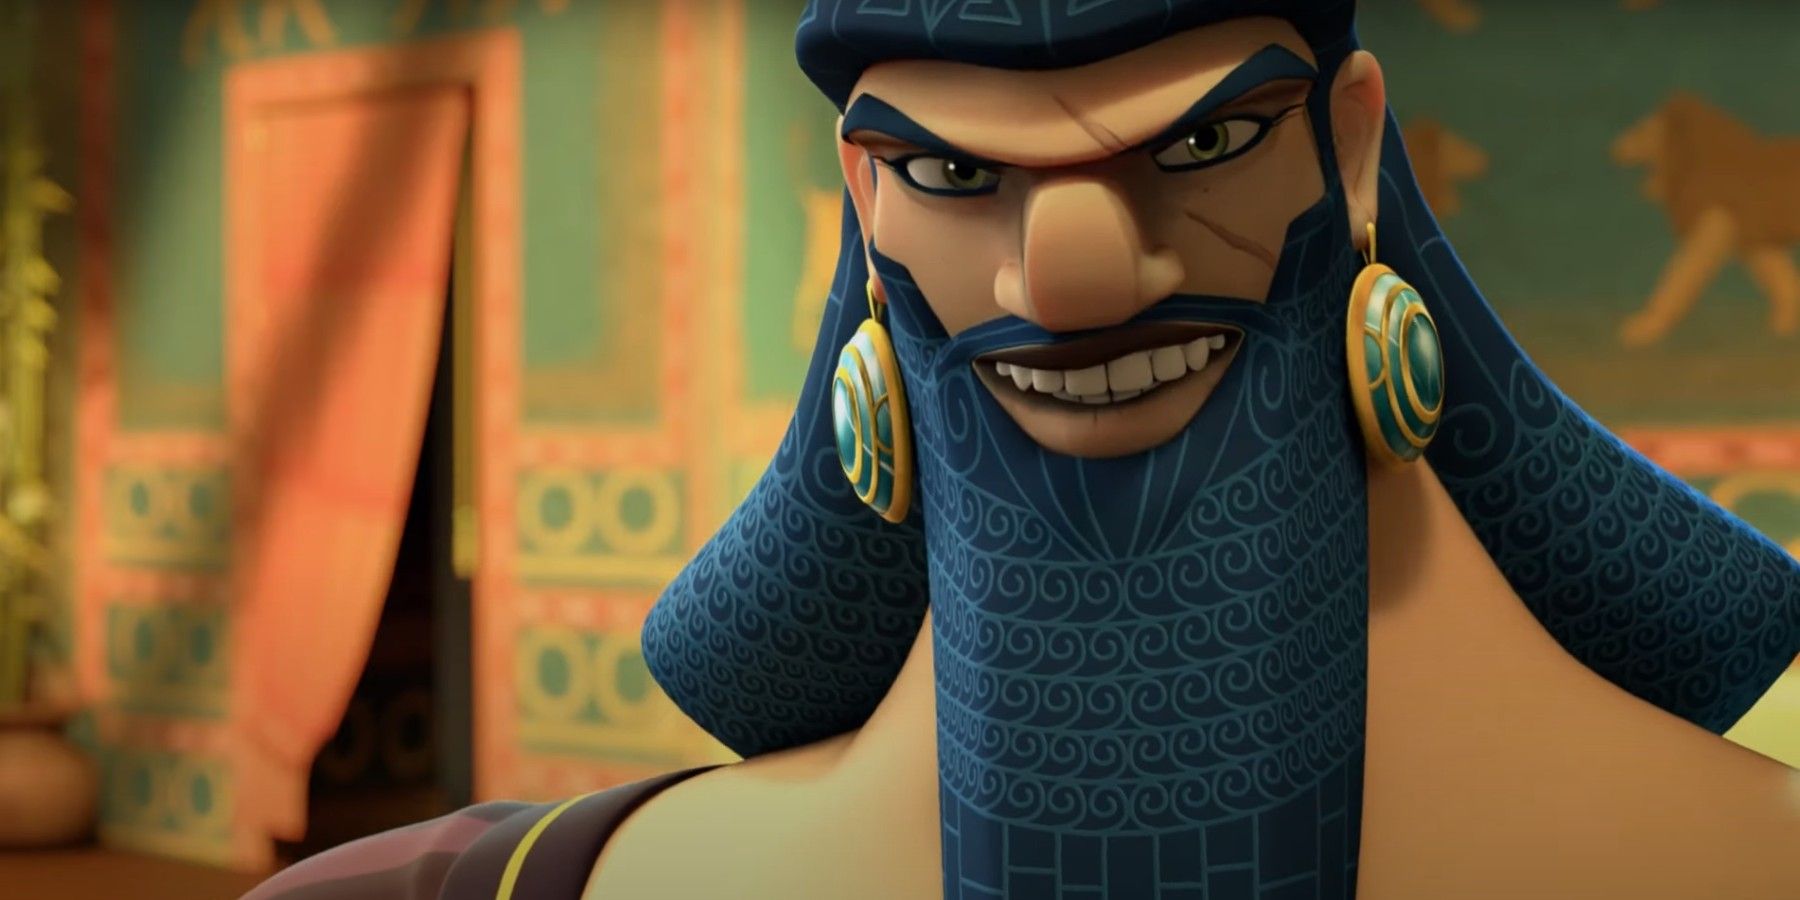 Gilgamesh movie being produced by Fortnite Creator